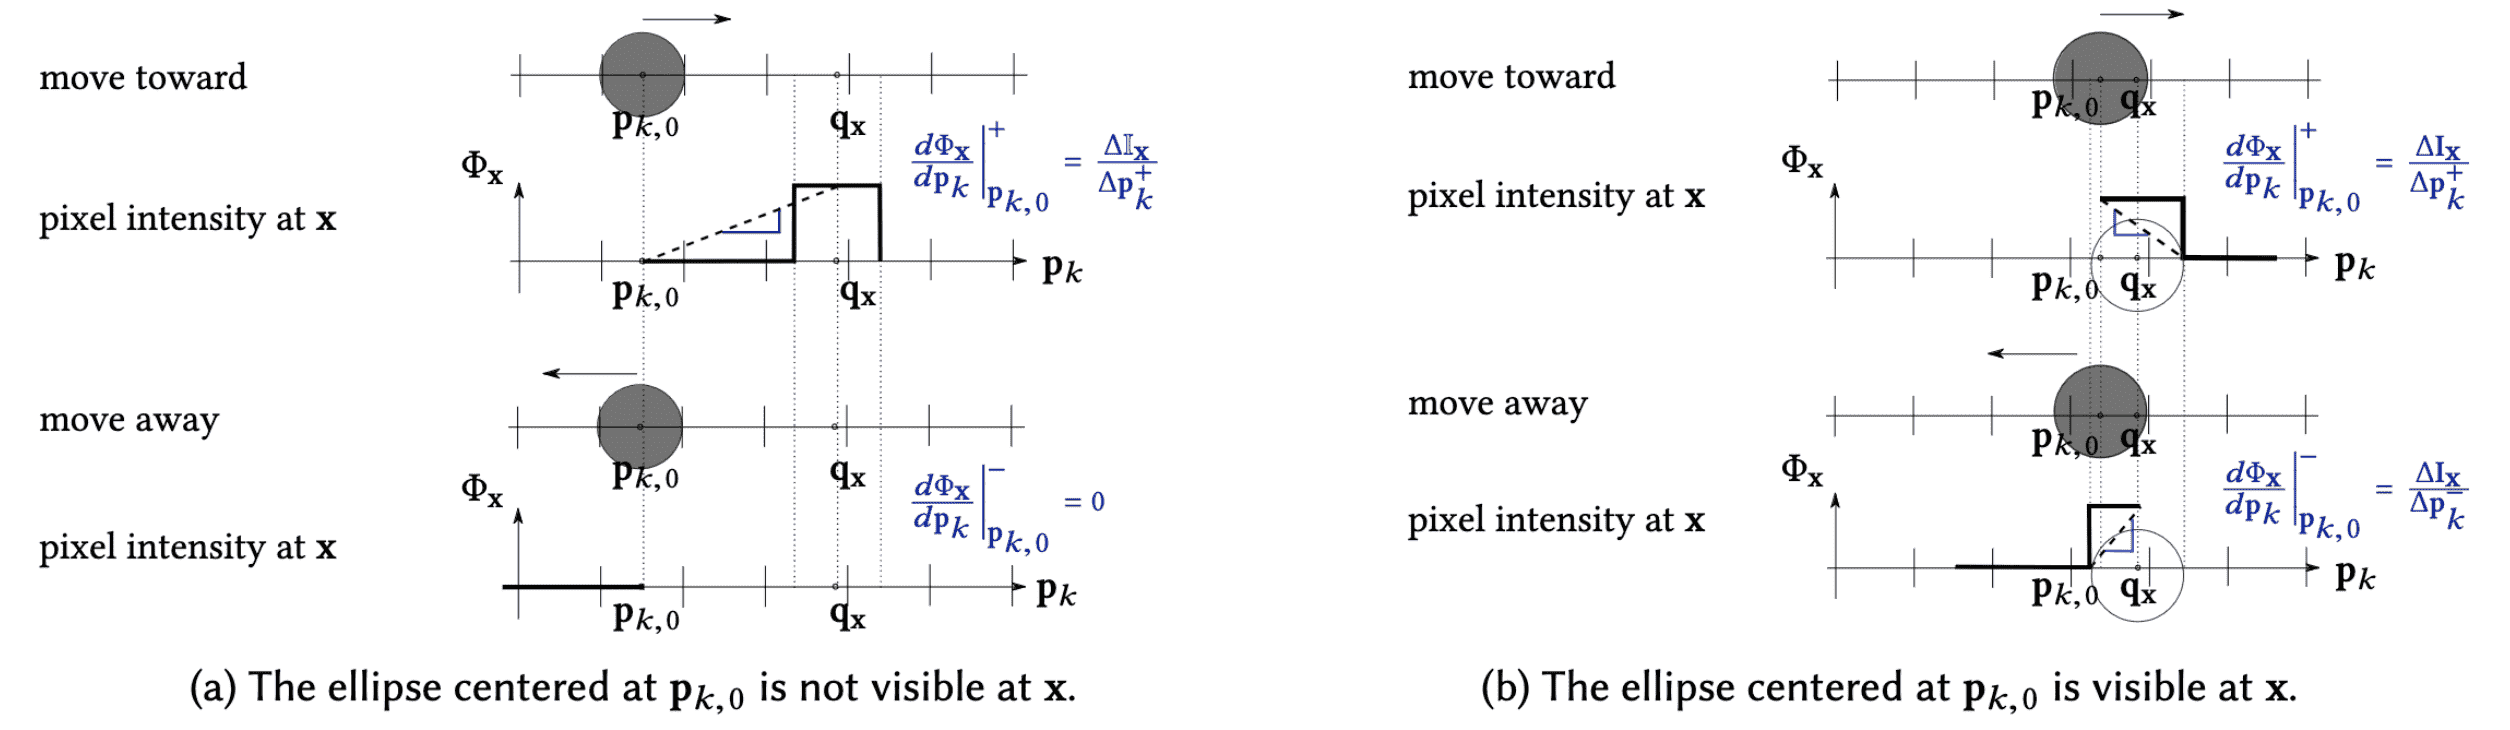 An illustration of the artificial gradient in two 1D scenarios